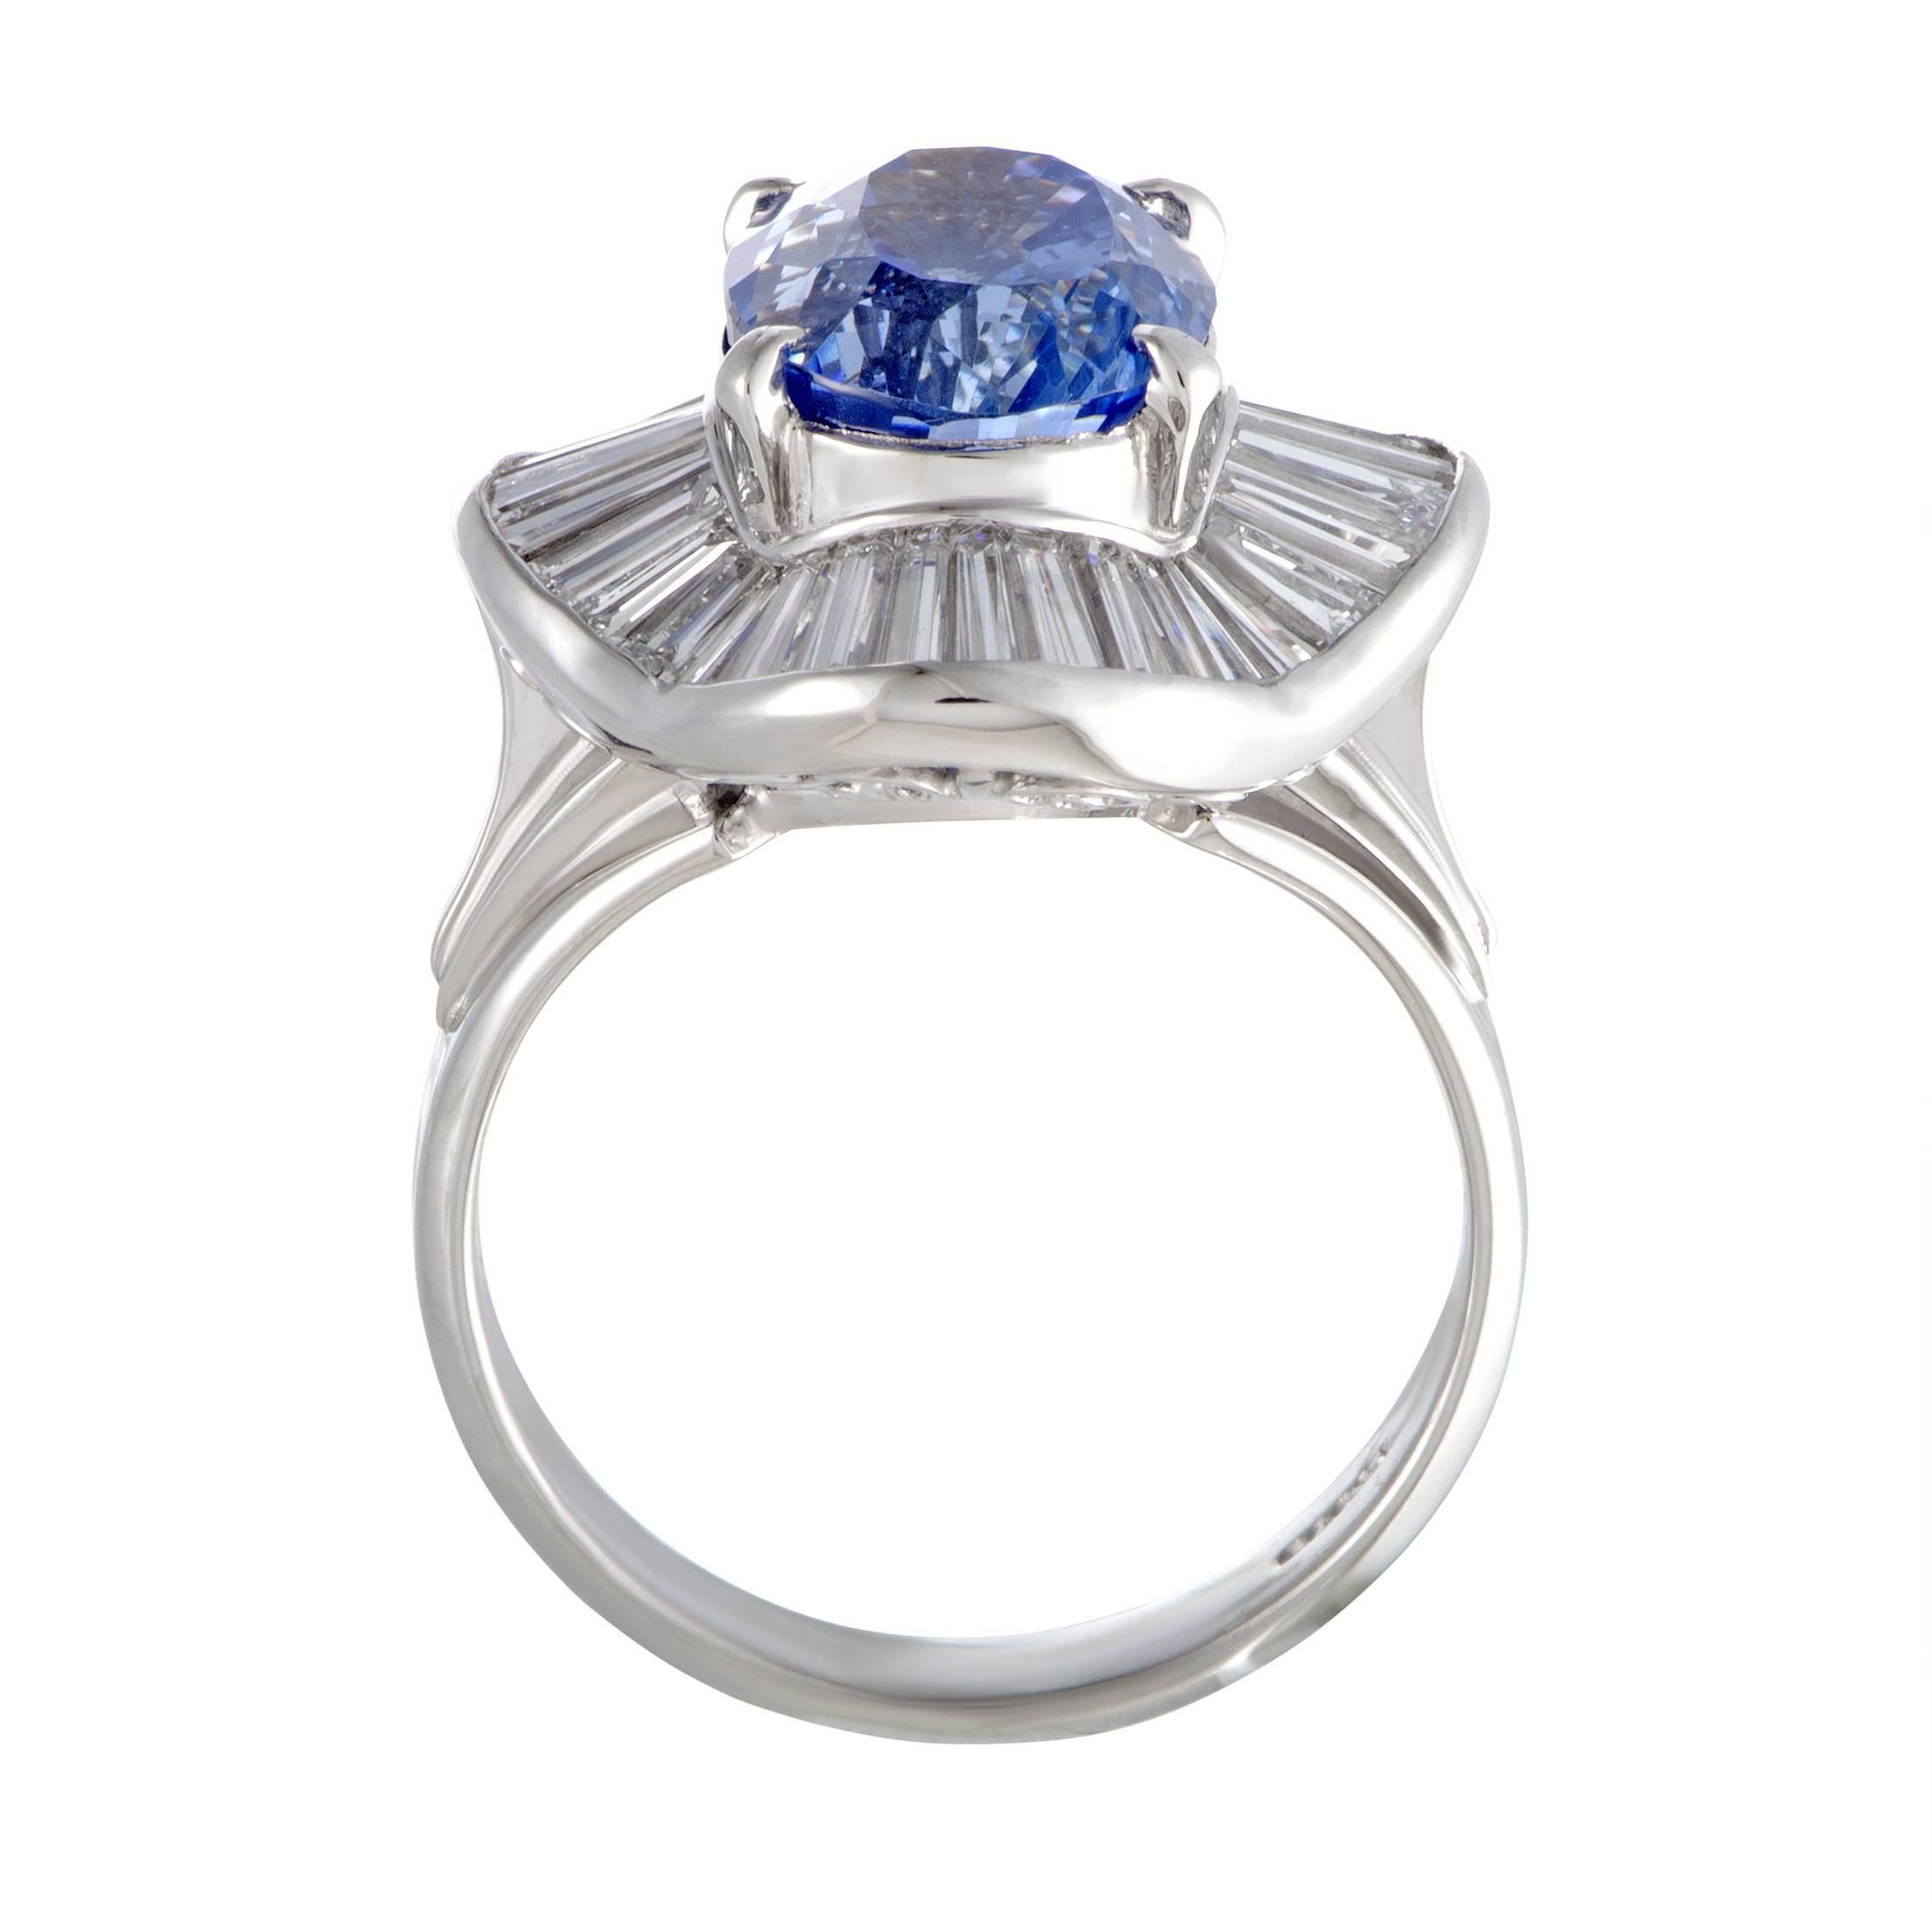 The endearing beauty of the sapphire stone is gorgeously brought out in this sublime ring by the luxurious resplendence of diamonds and the prestigious sheen of platinum. The ceylon sapphire weighs 6.41 carats and the diamonds total 1.92 carats.